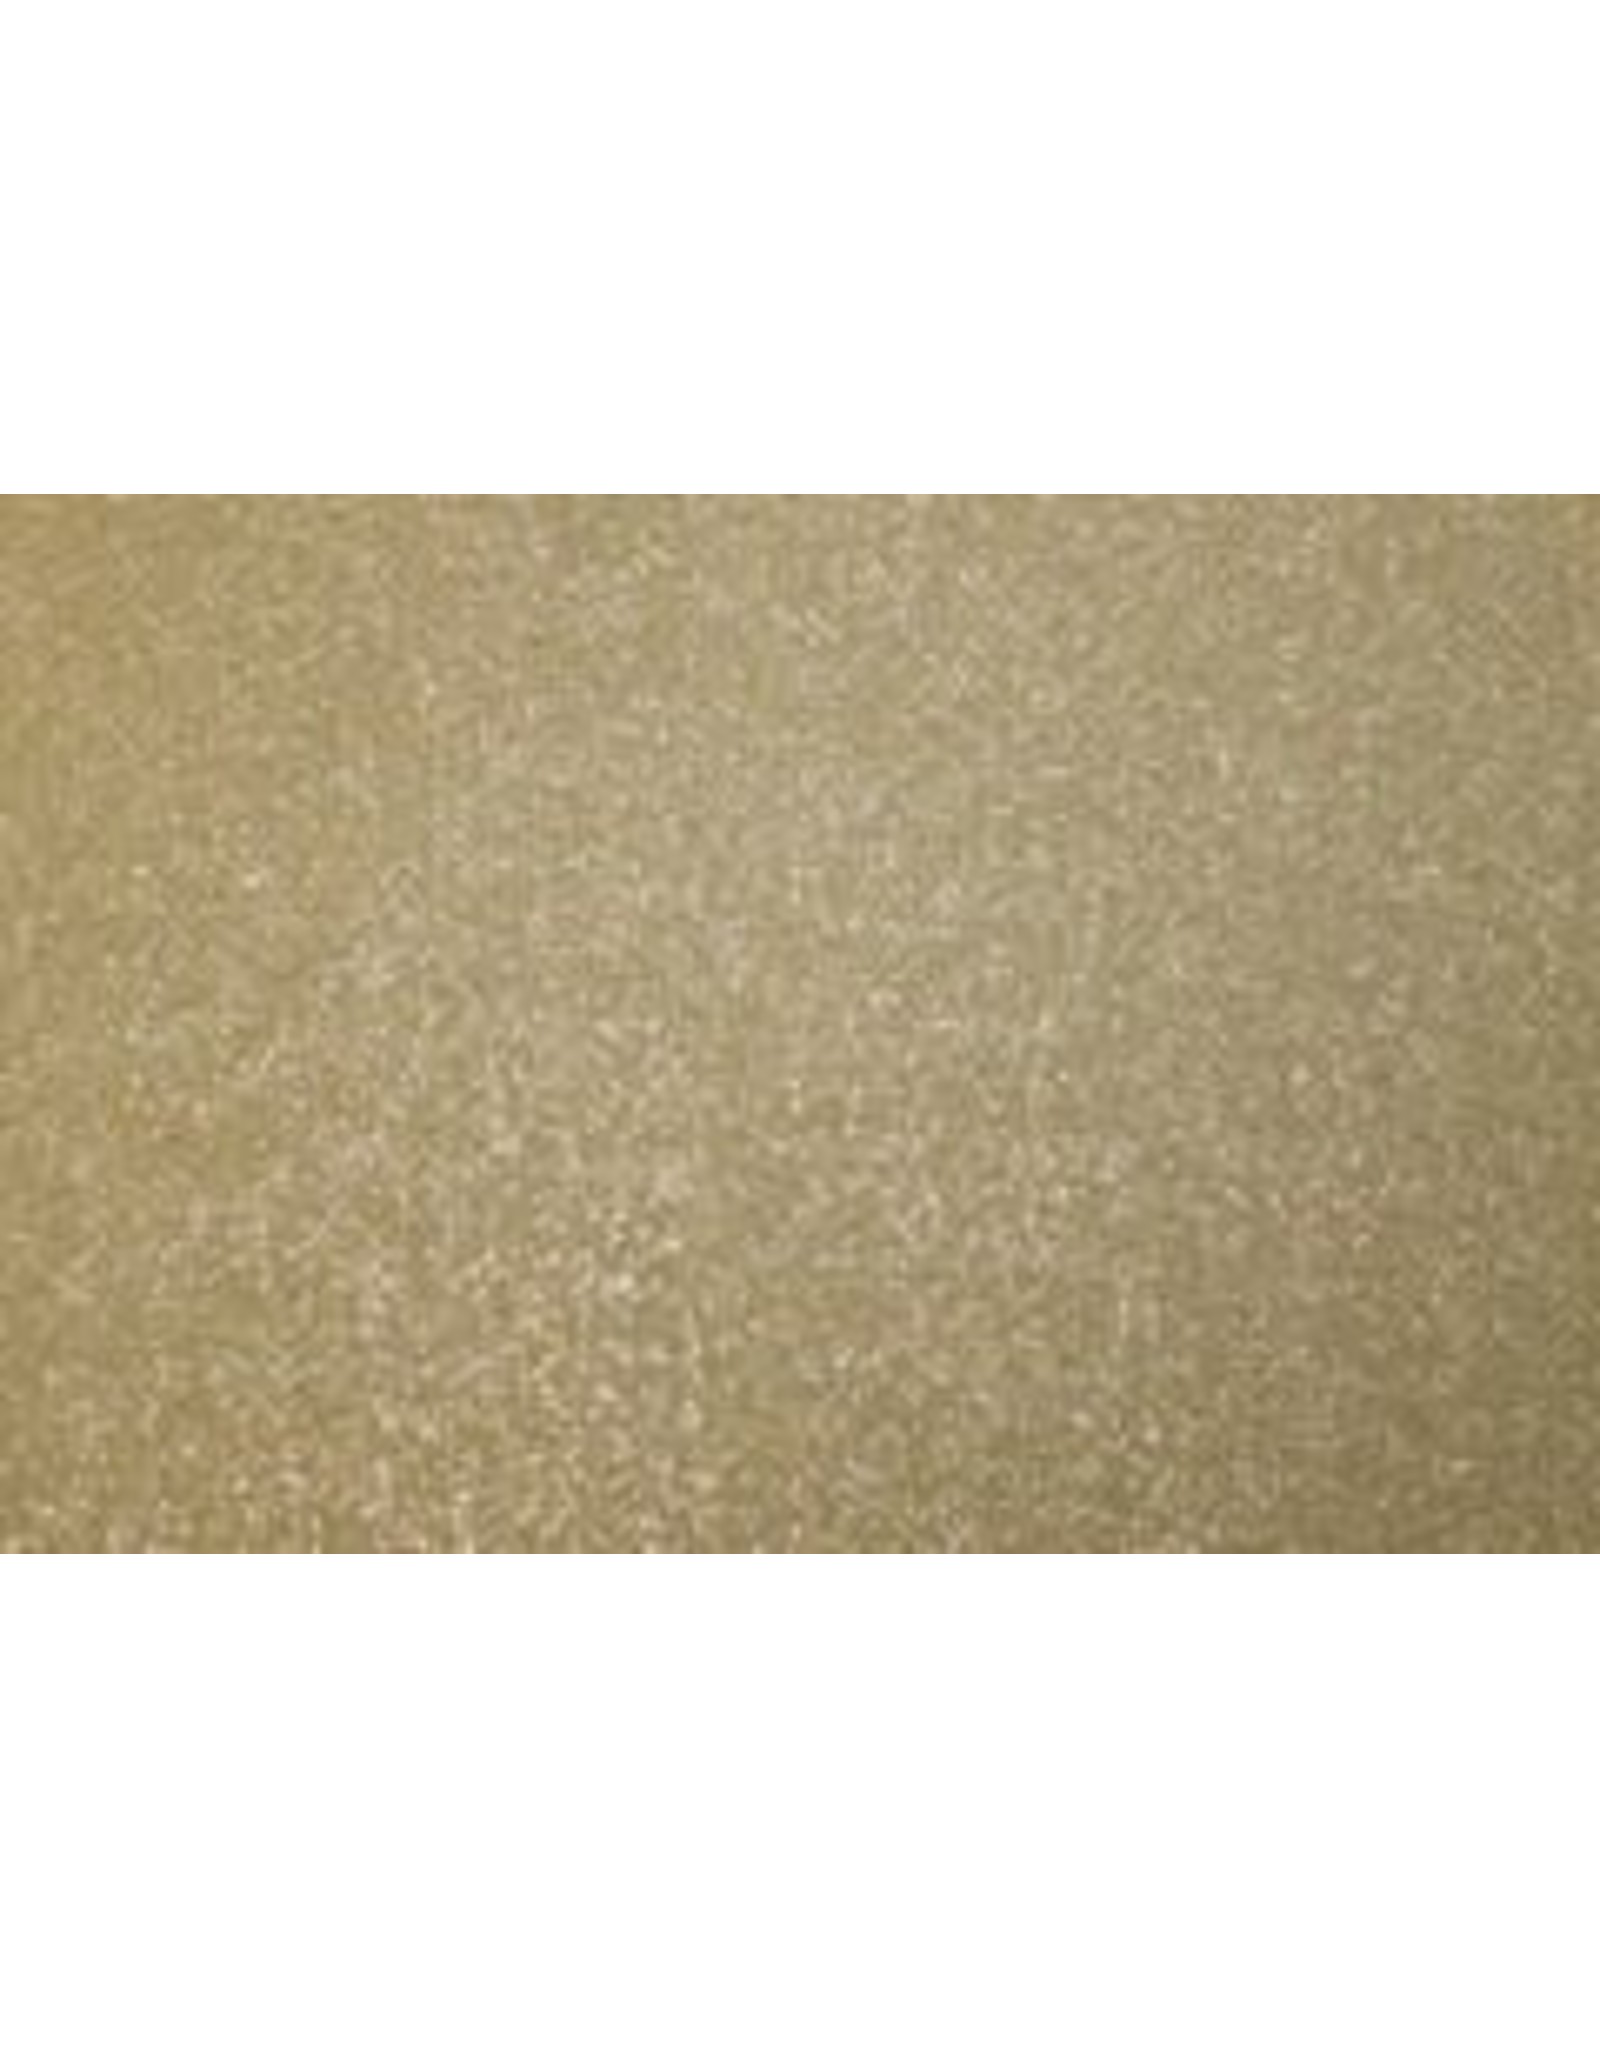 BEST CREATIONS INC. BEST CREATIONS BRIGHT GOLD SHIMMER SAND CARDSTOCK 12X12